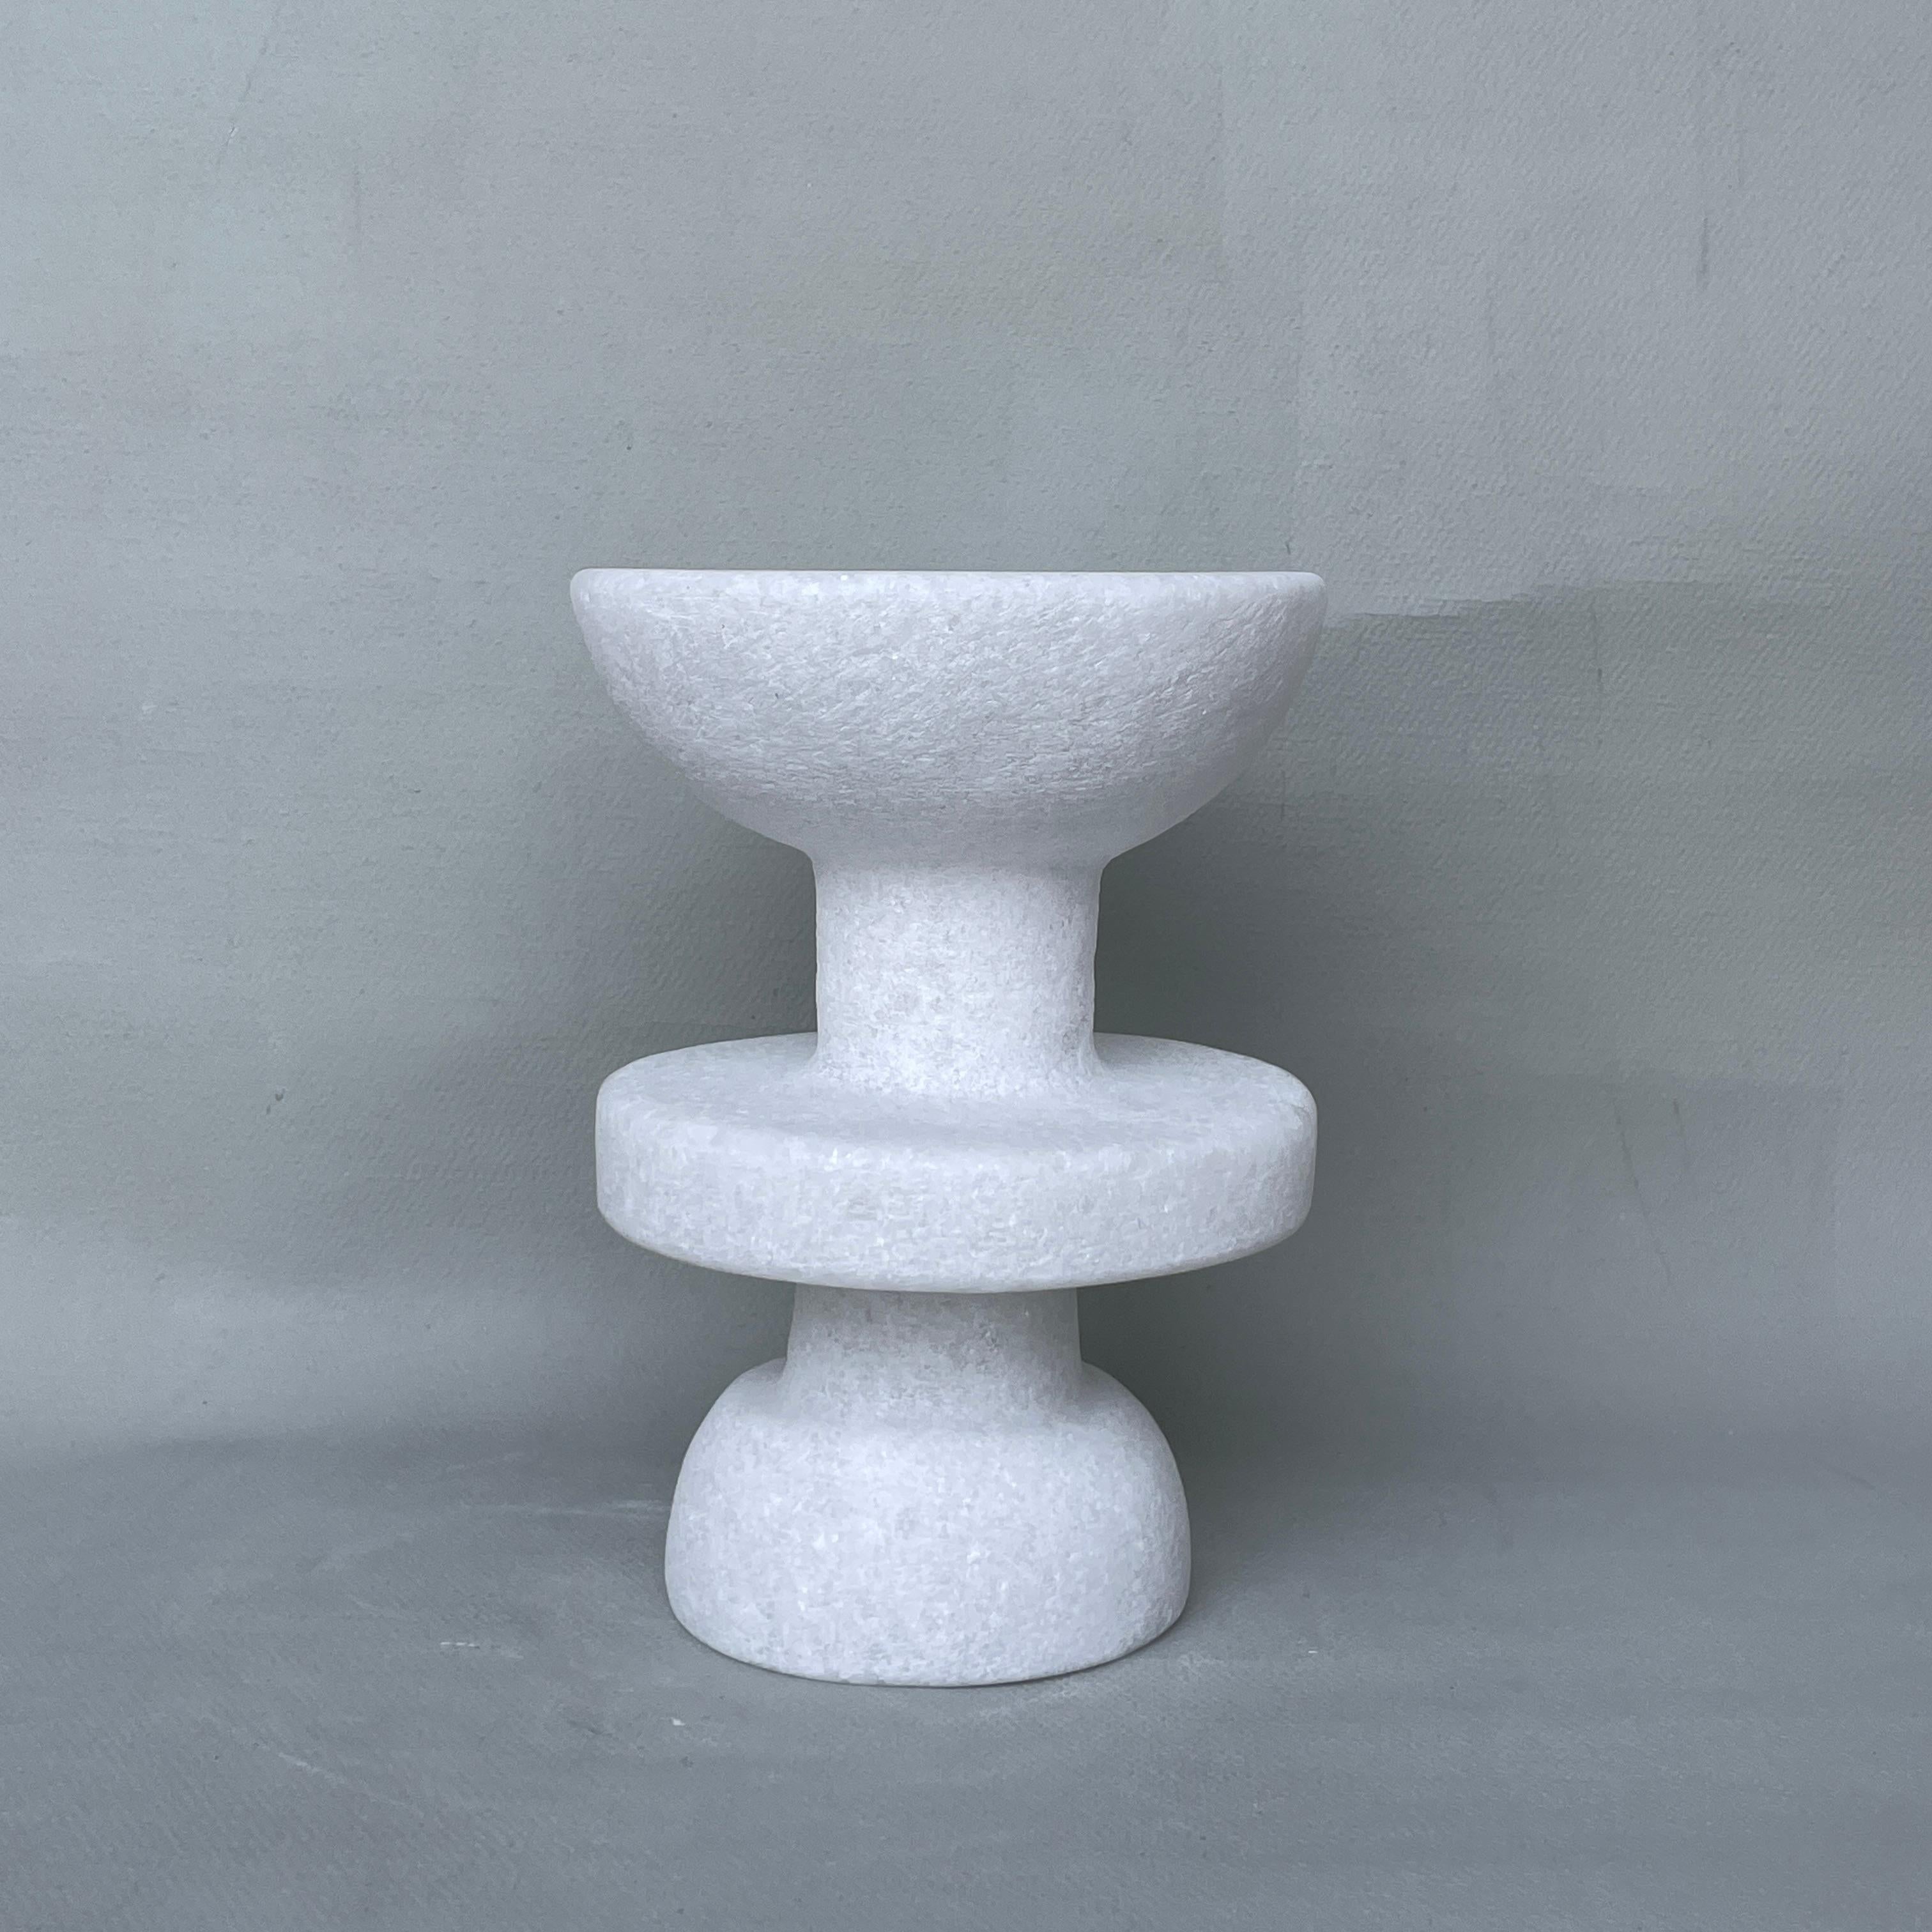 Unique Naxian Marble Vessel by Tom Von Kaenel
Unique piece.
Dimensions: Ø 14.5 x H 20 cm.
Materials: Naxian marble.

The surfaces of the objects are not sealed, they are not protected against acid. The lines of the handcraft are visible it